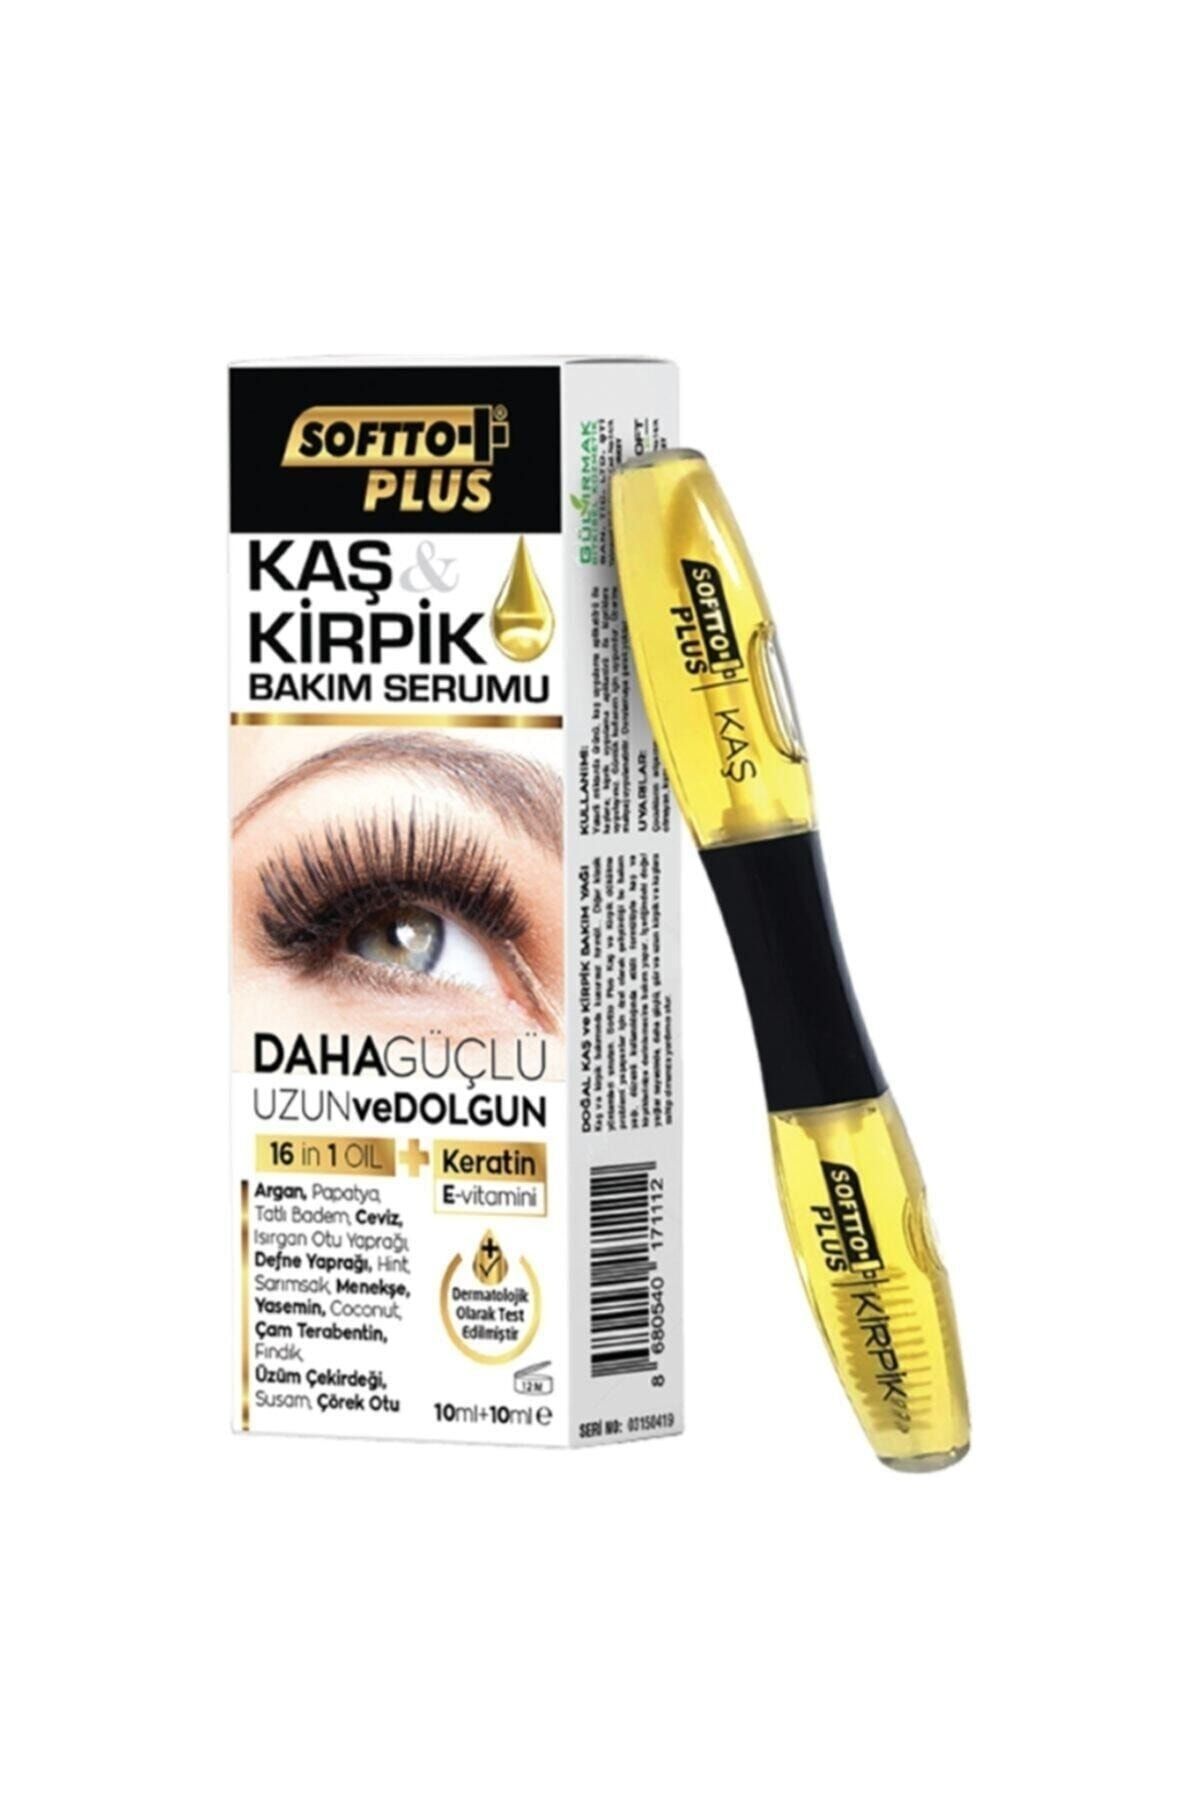 Softto Plus Eyebrow Lash Serum for Thick and Long Lashes .10 ml